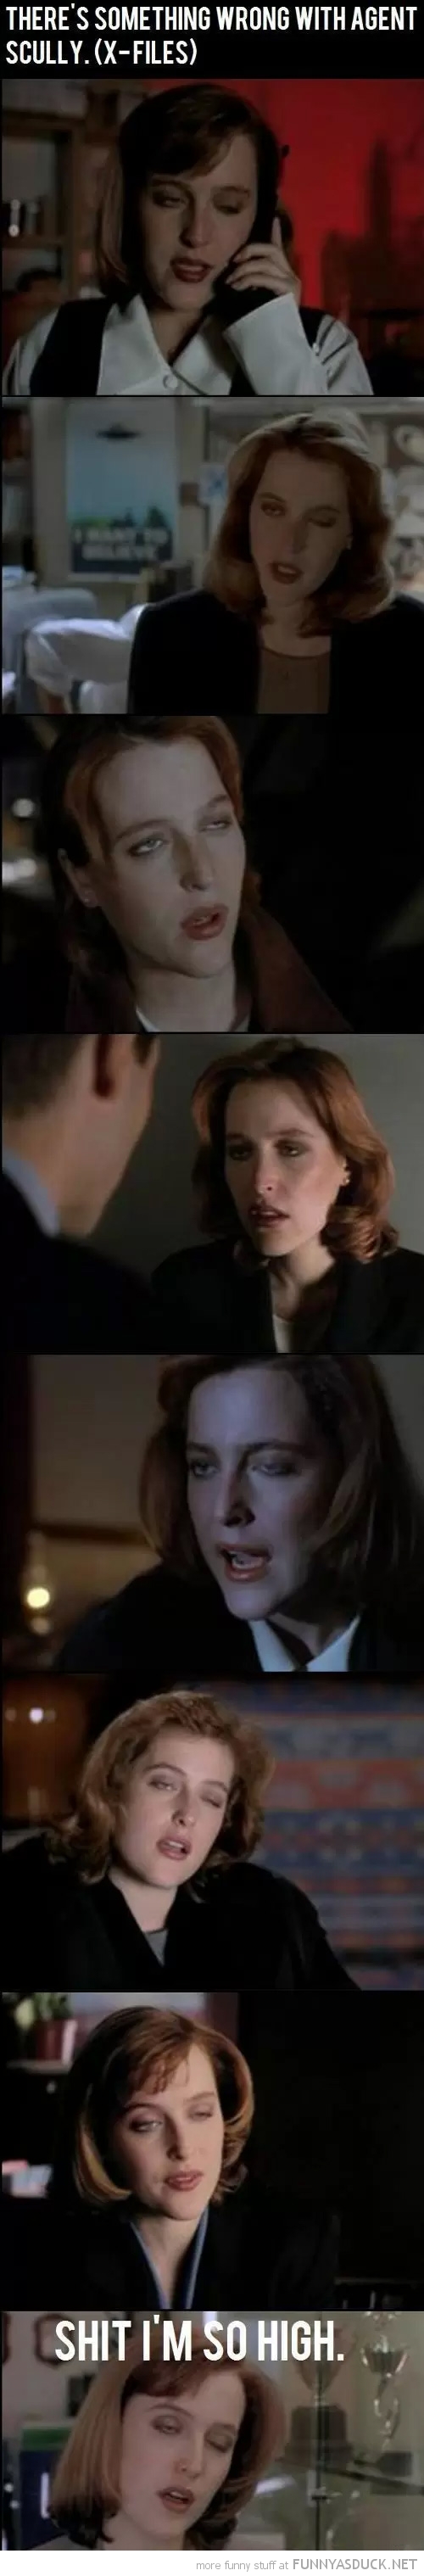 Something's Wrong With Scully